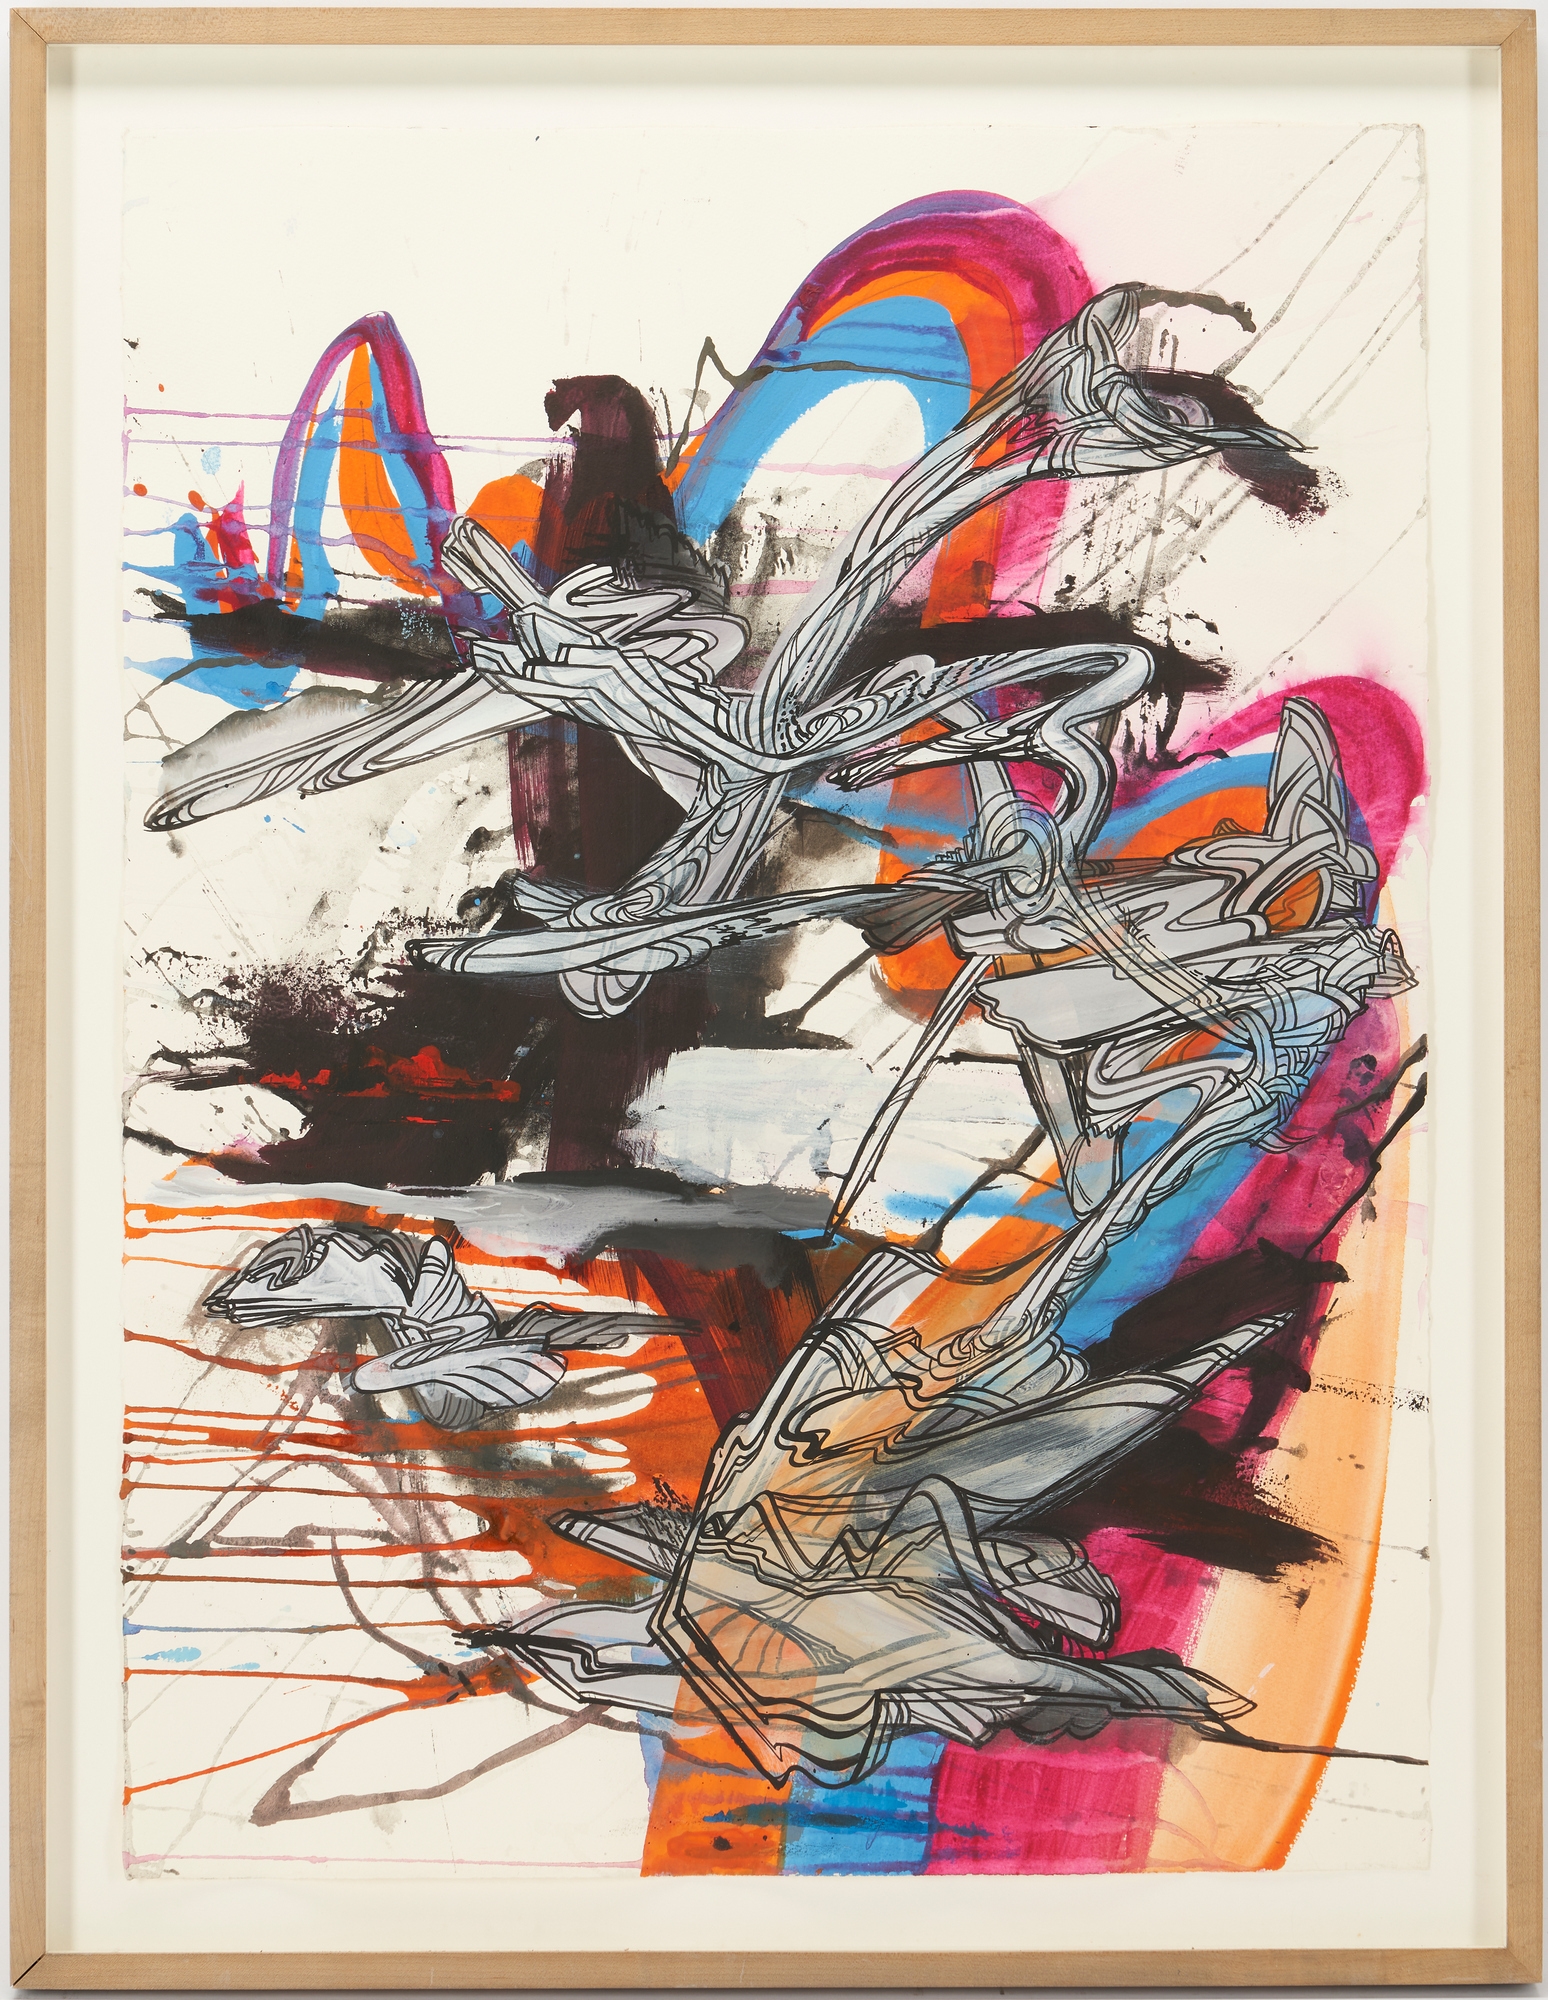 Wang Suling Mixed Media Abstract Painting, Untitled, 2006, 2 of 3 by Suling Wang